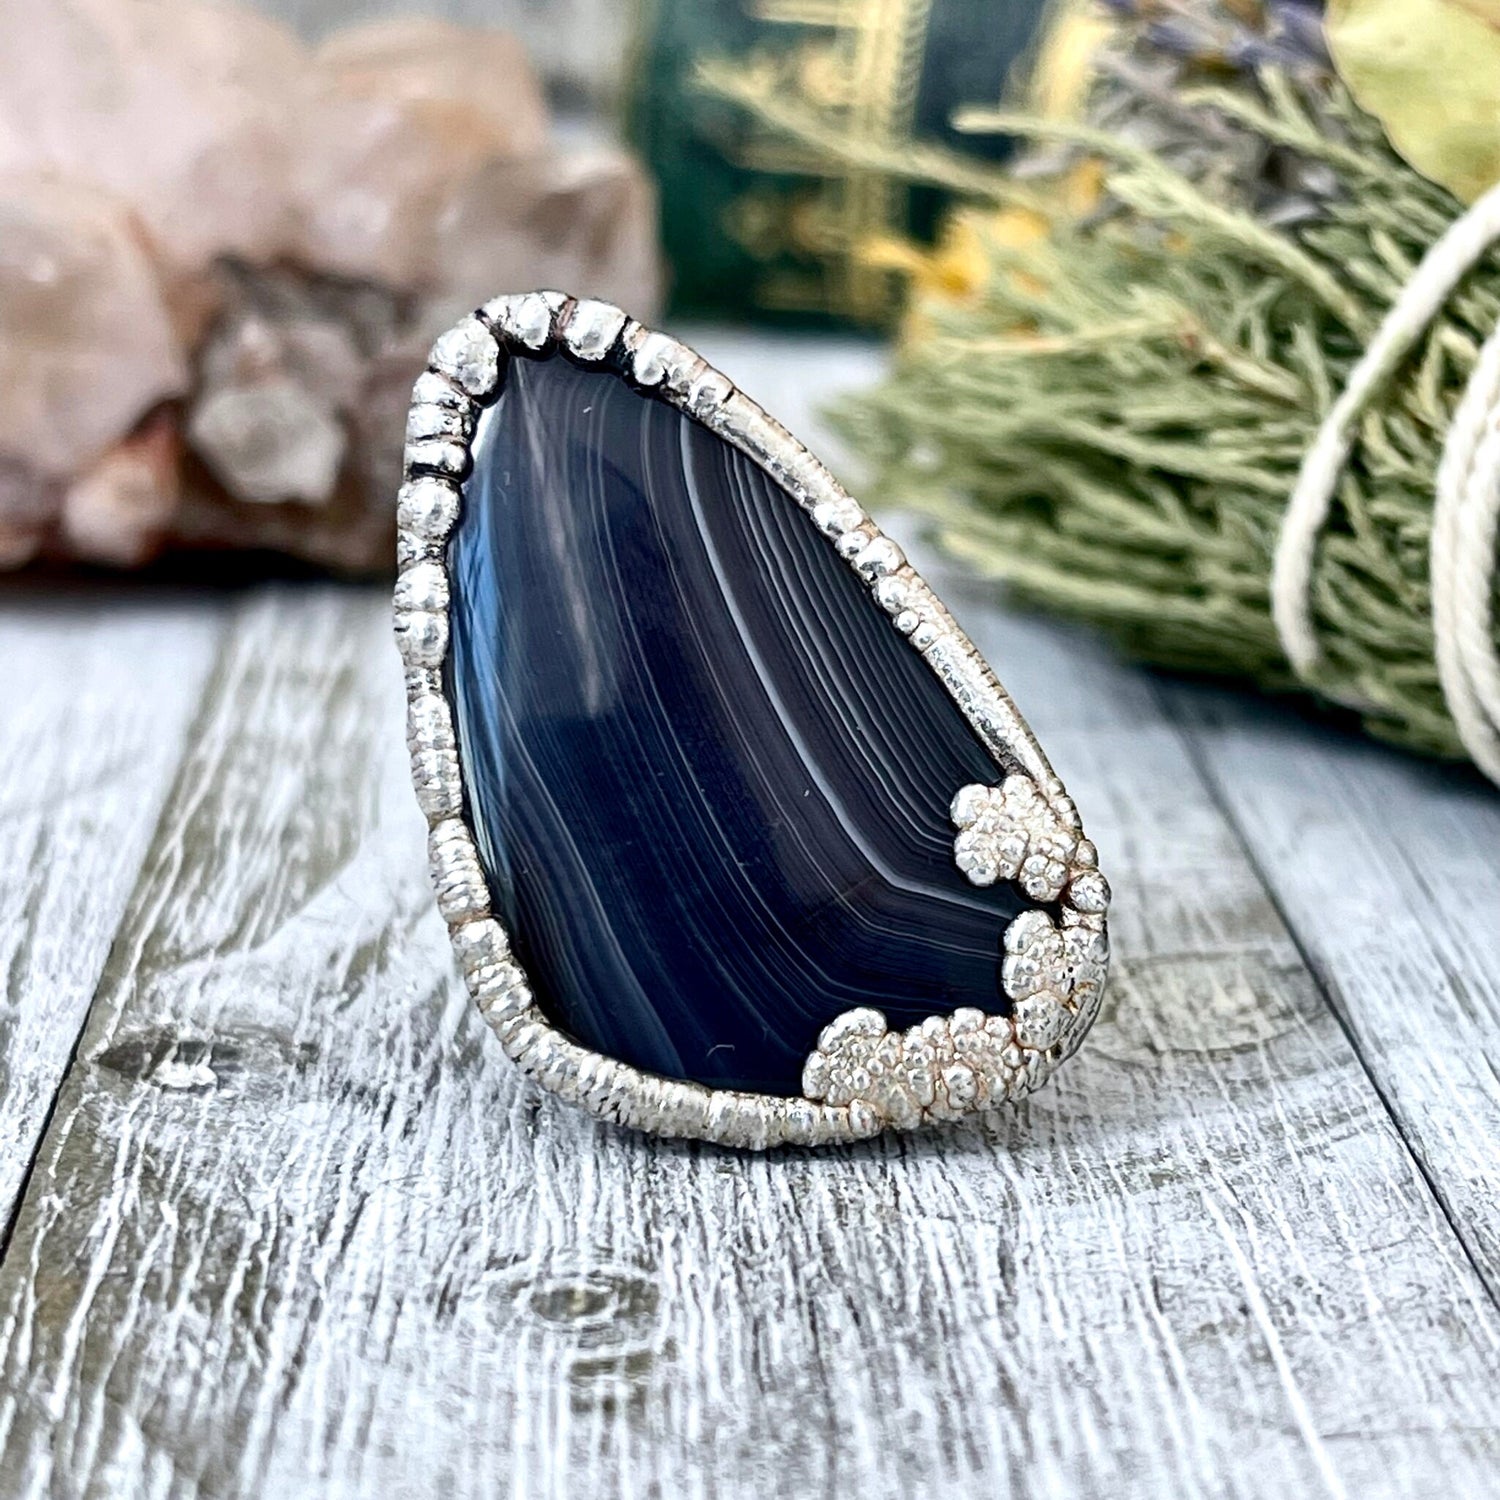 Size 6 Botswana Agate Statement Ring Set in Fine Silver / Foxlark Collection - One of a Kind